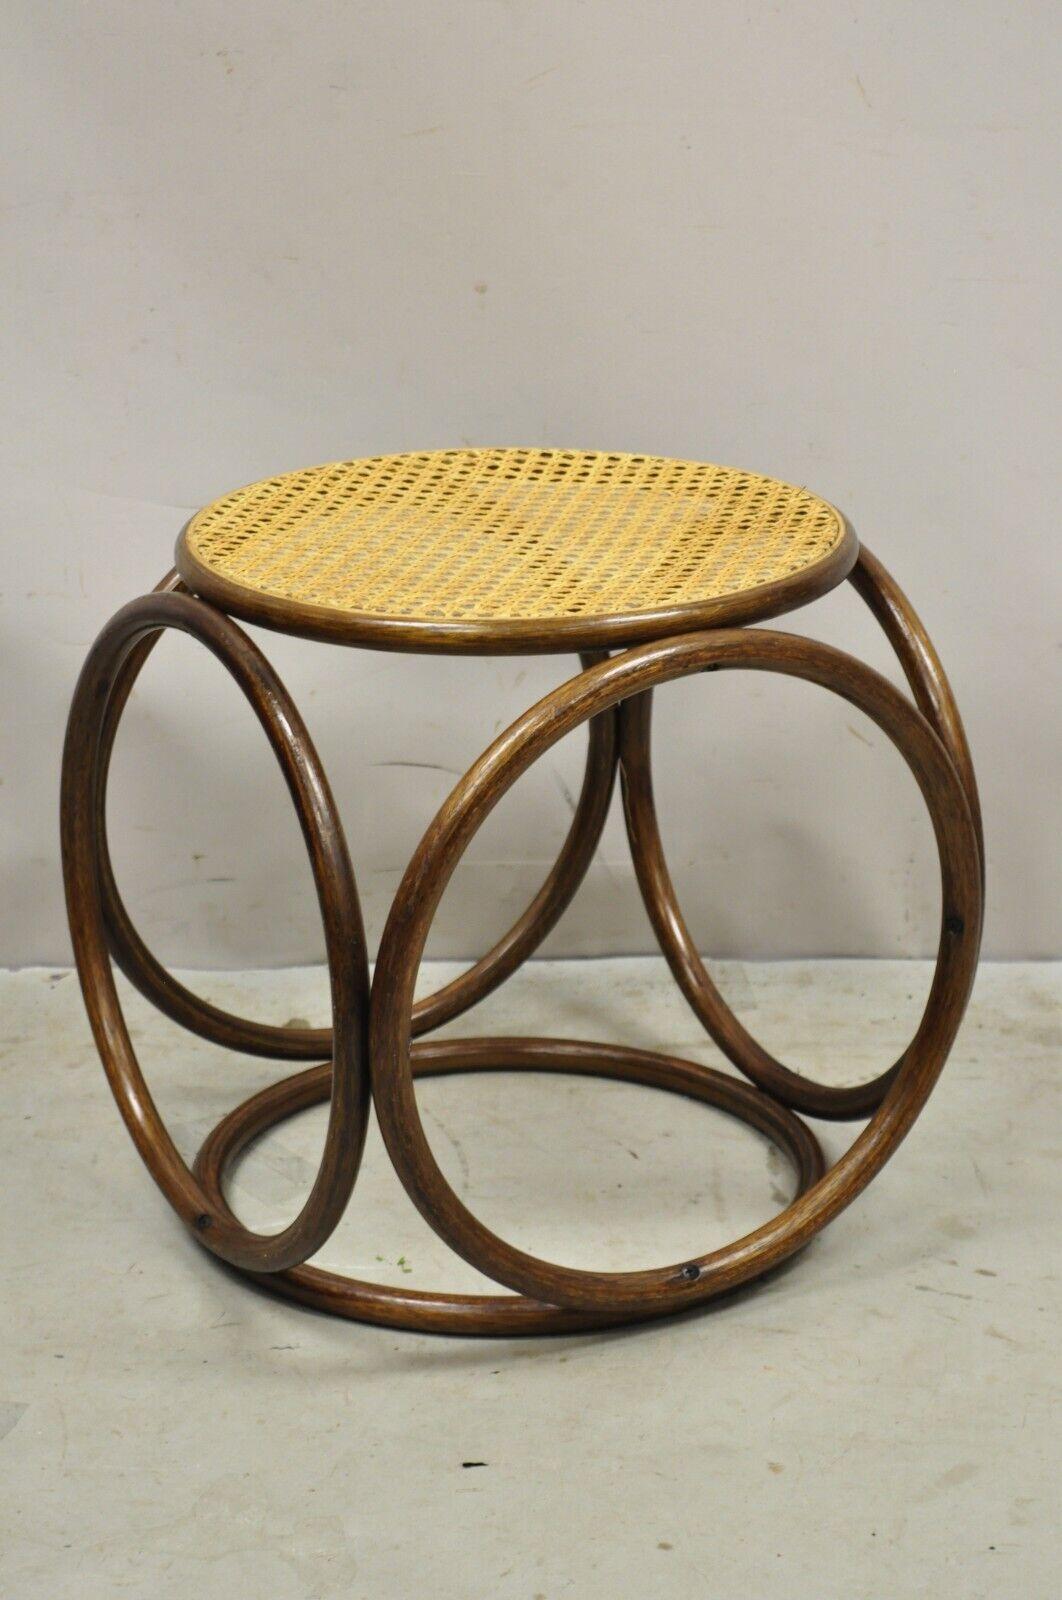 Vintage Mid Century Modern Thonet Bentwood Cane Seat Round Stool (B) For Sale 3